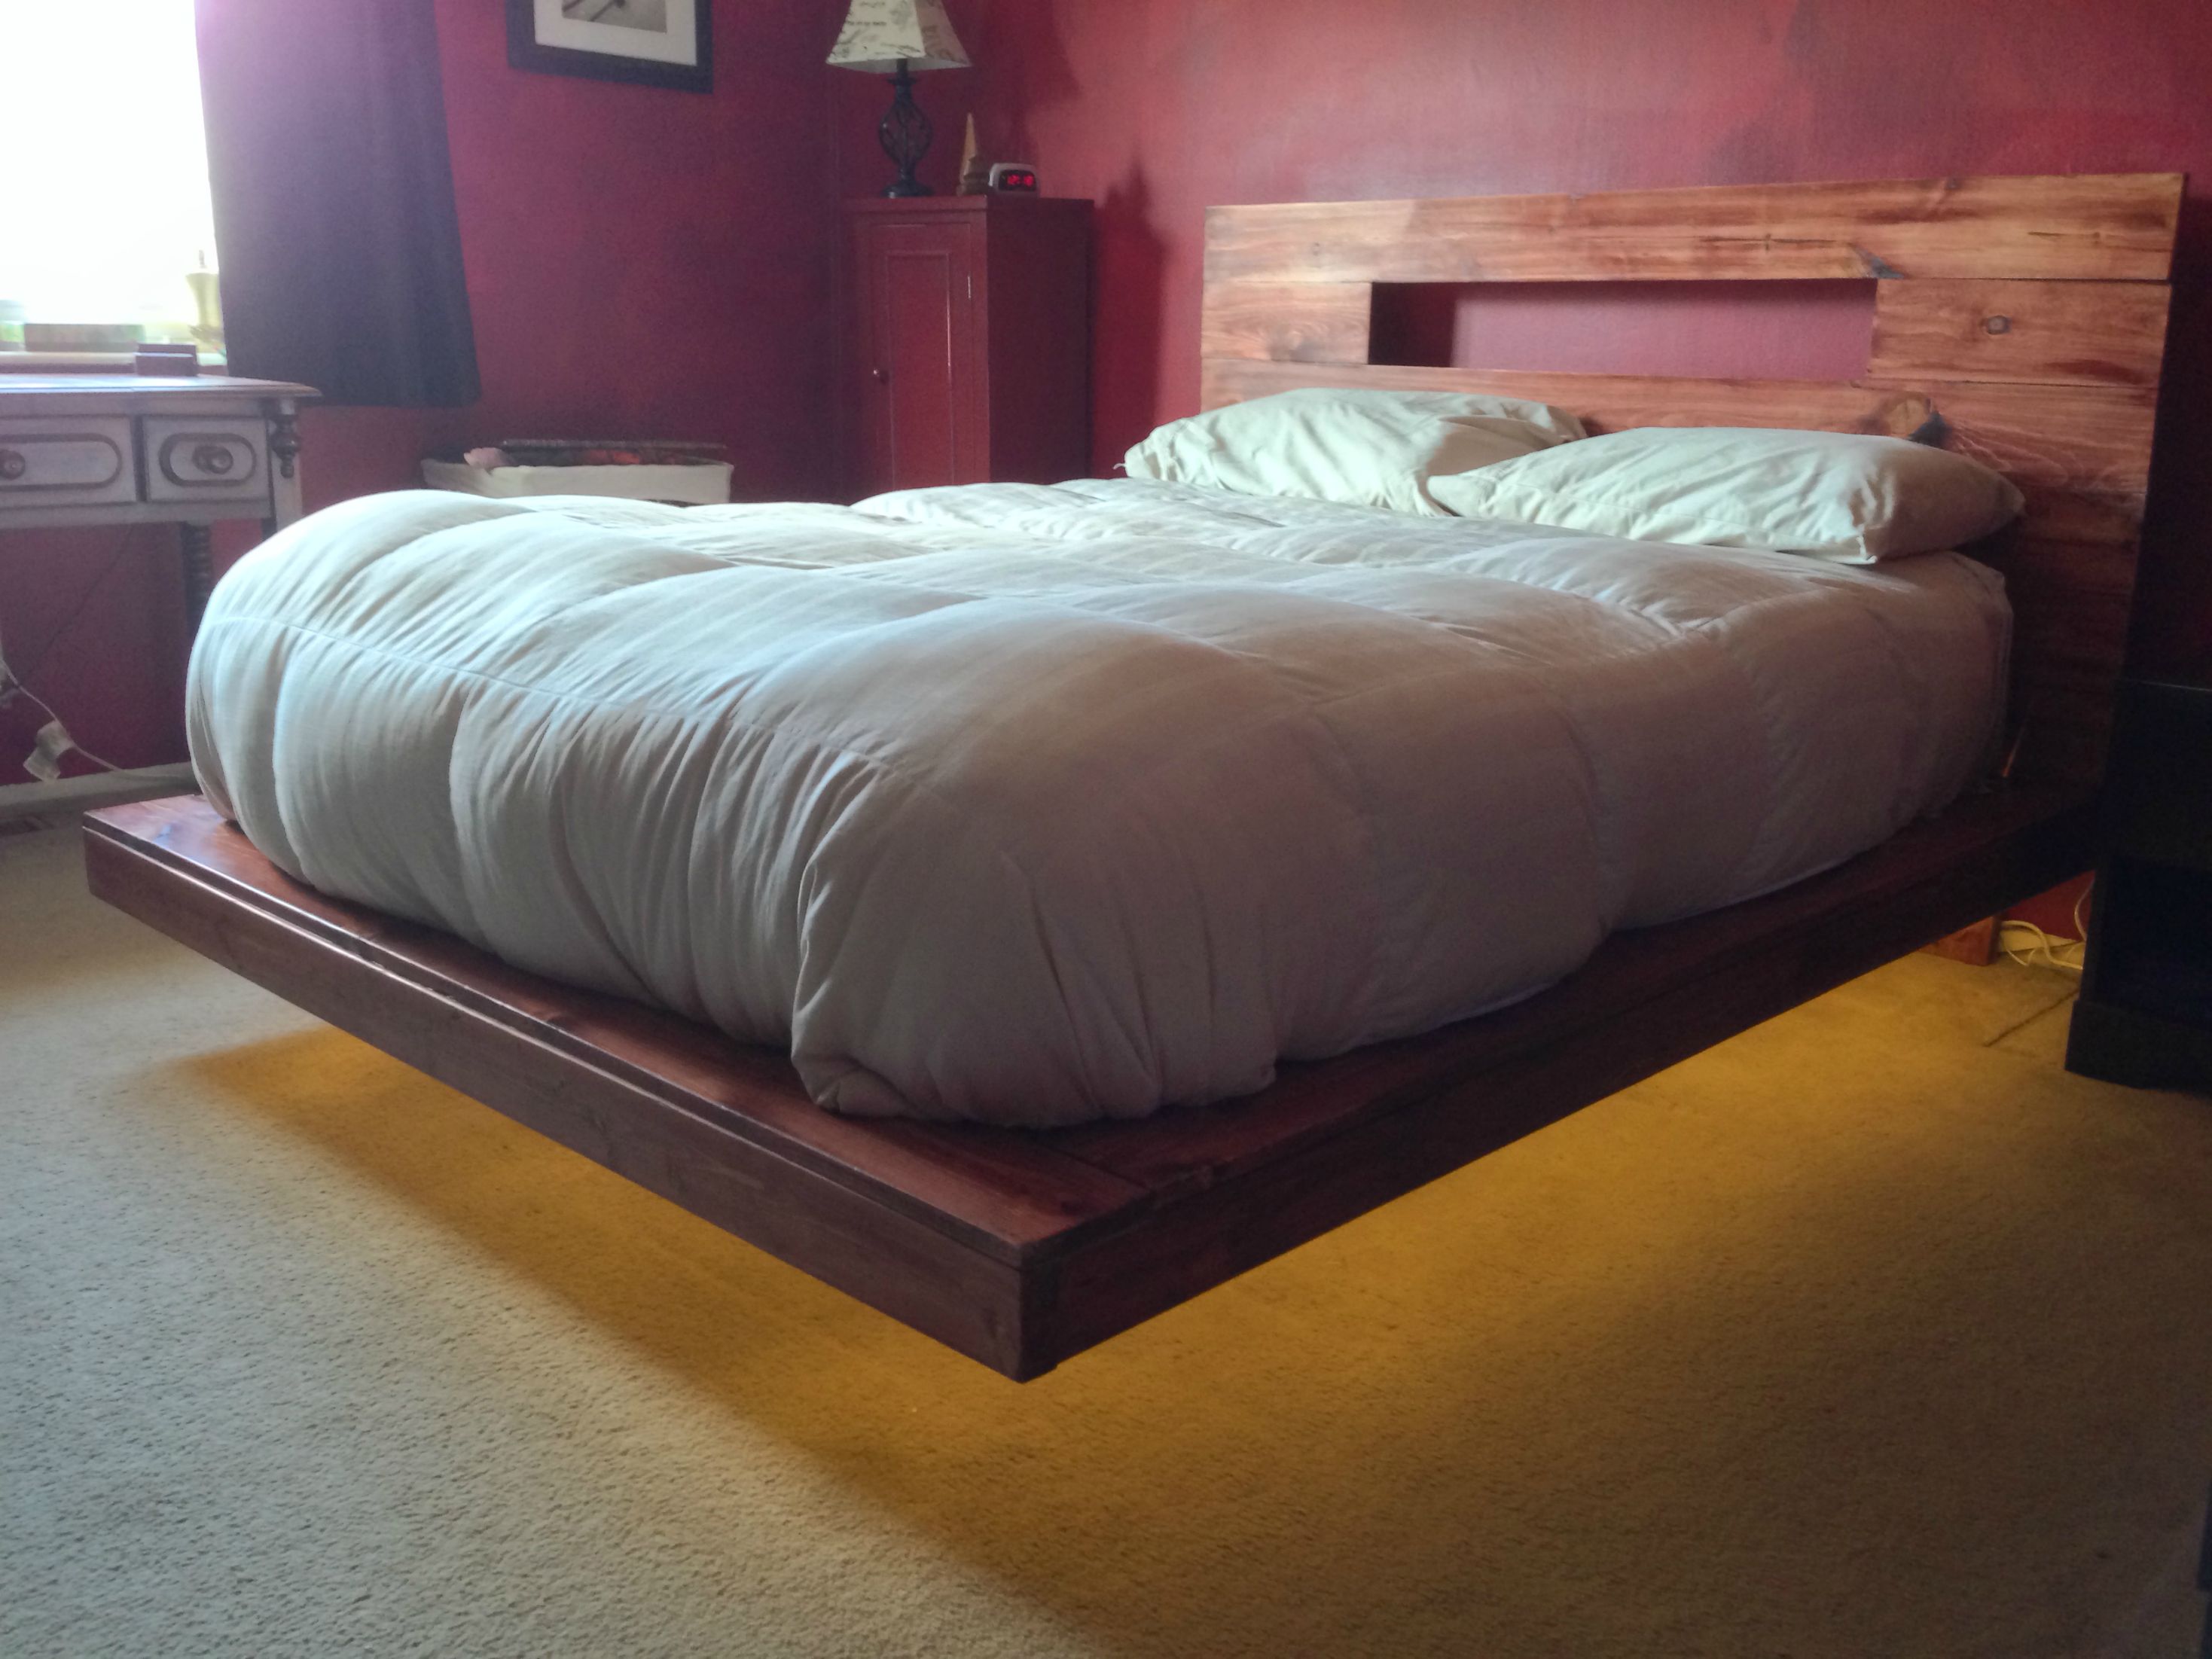 21 Diy Bed Frames To Give Yourself The, How To Make Own Bed Frame